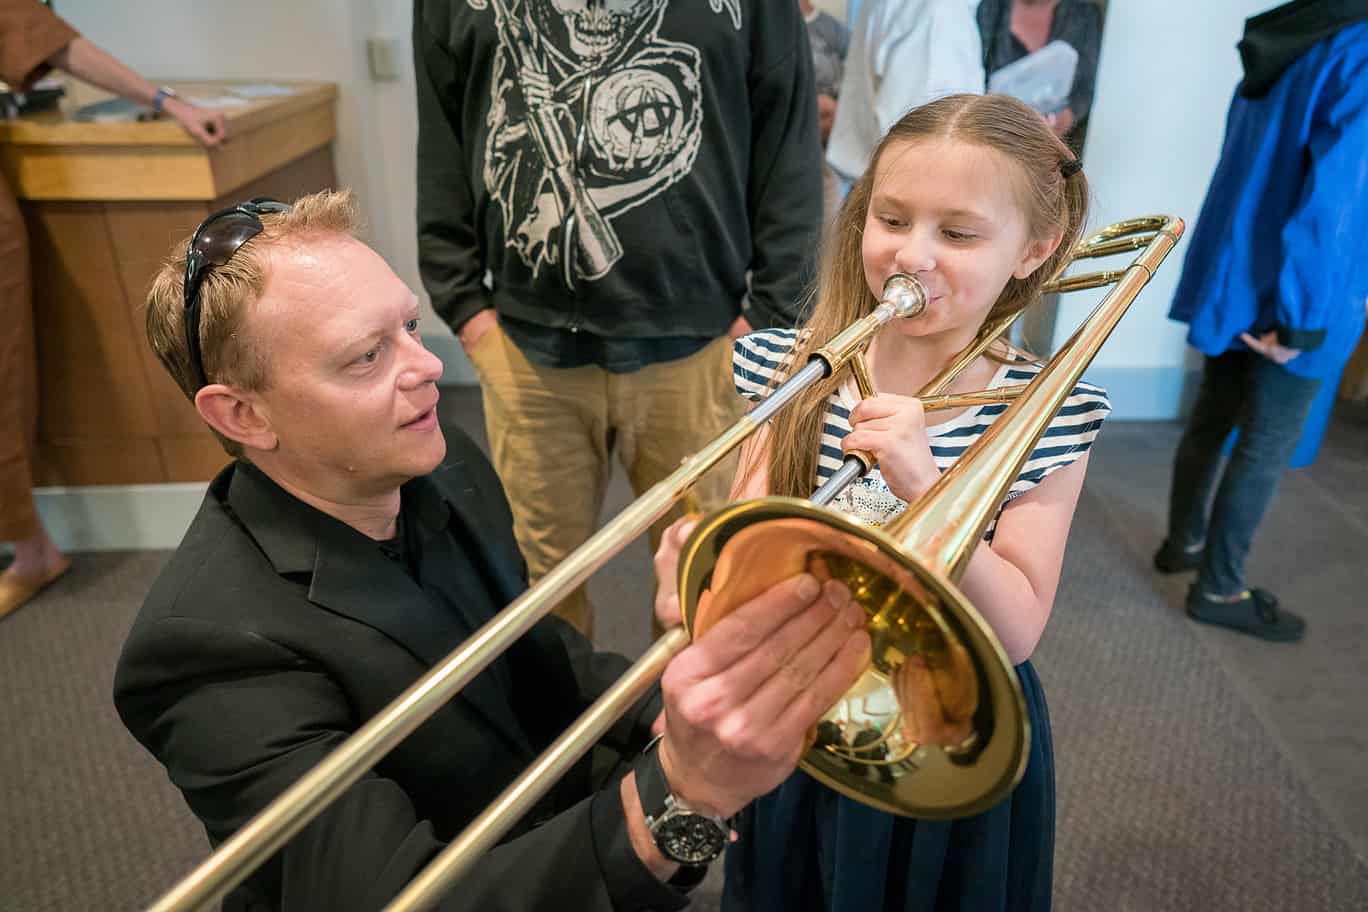 A little girl tries to play a trombone being held by a teacher